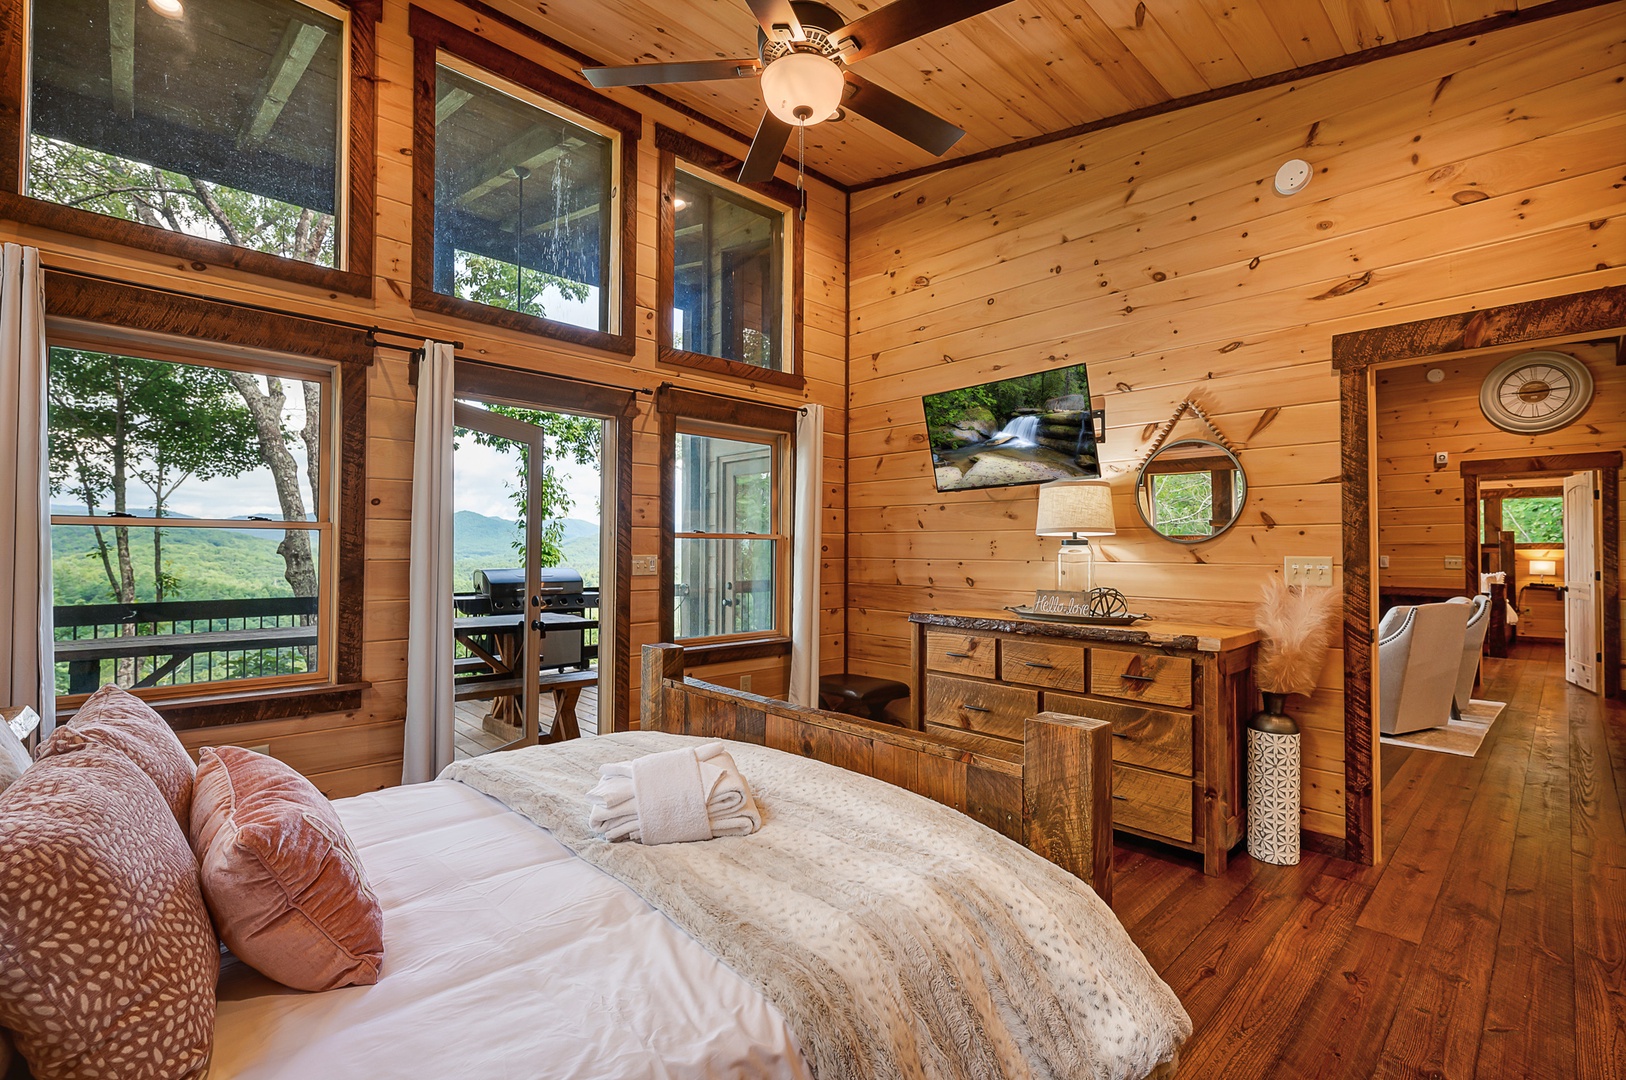 Feather & Fawn Lodge- Entry level guest bedroom with a dresser and mounted TV